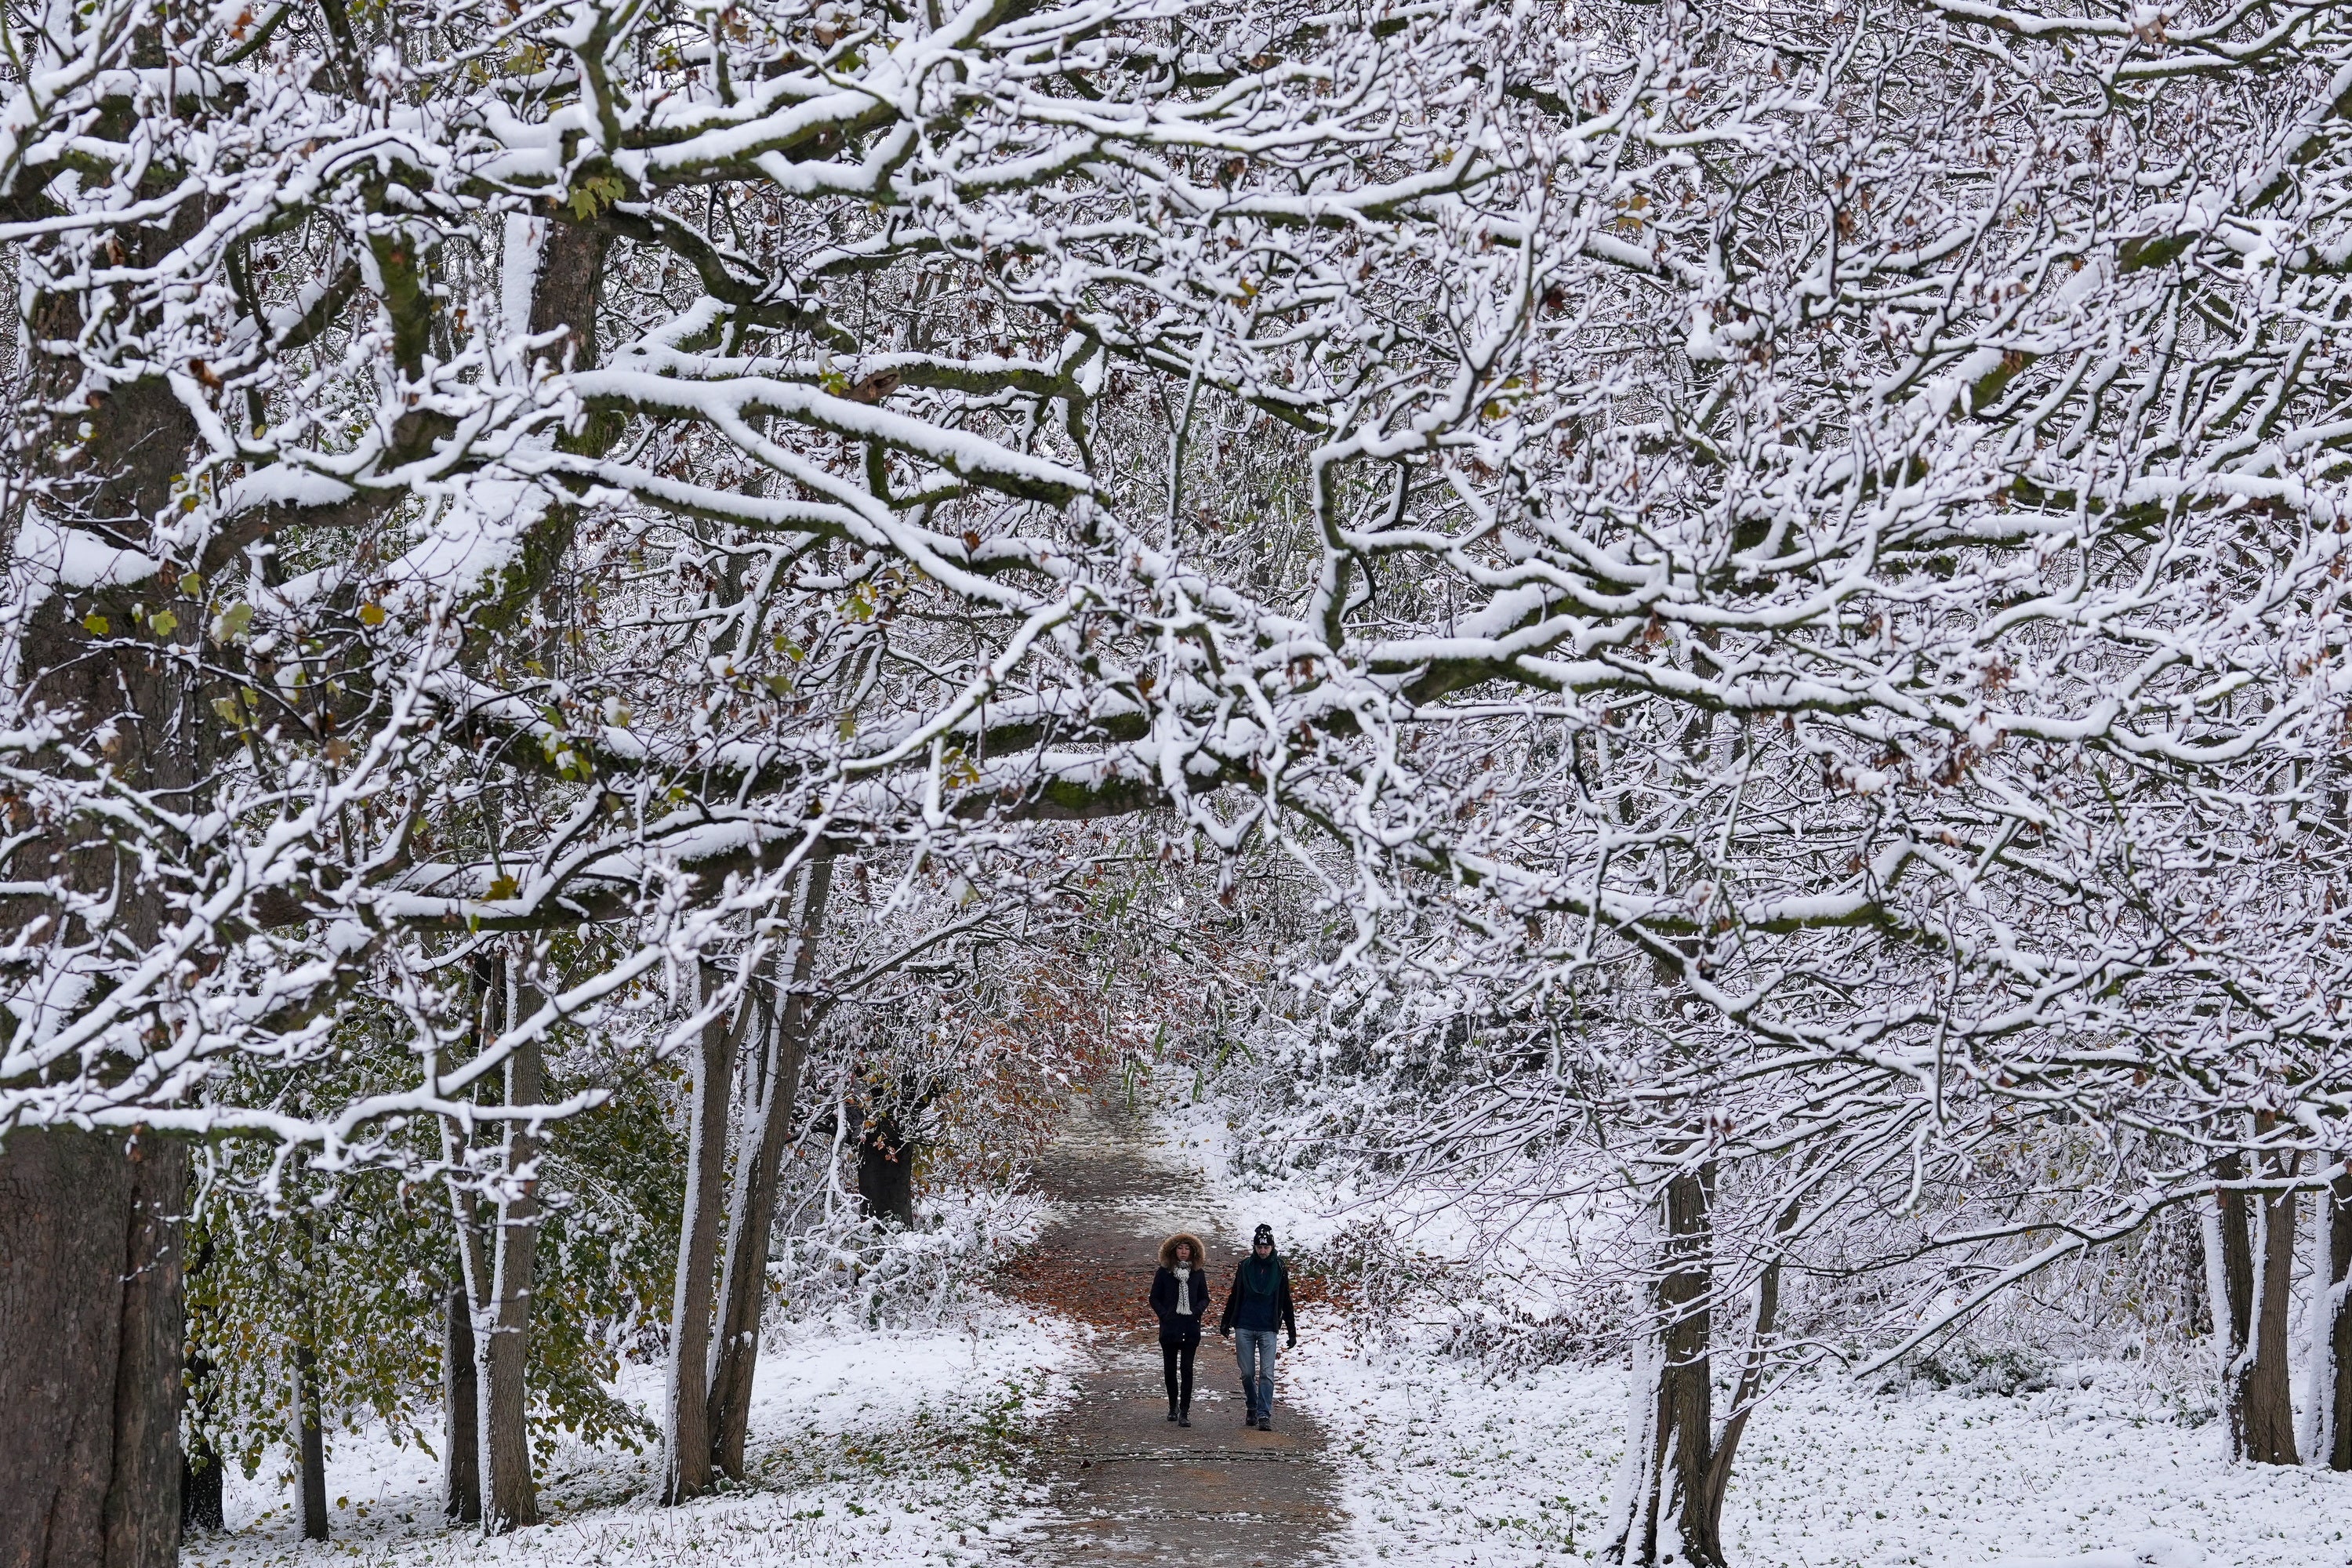 Temperatures dropped to freezing in parts of Scotland on Christmas Day